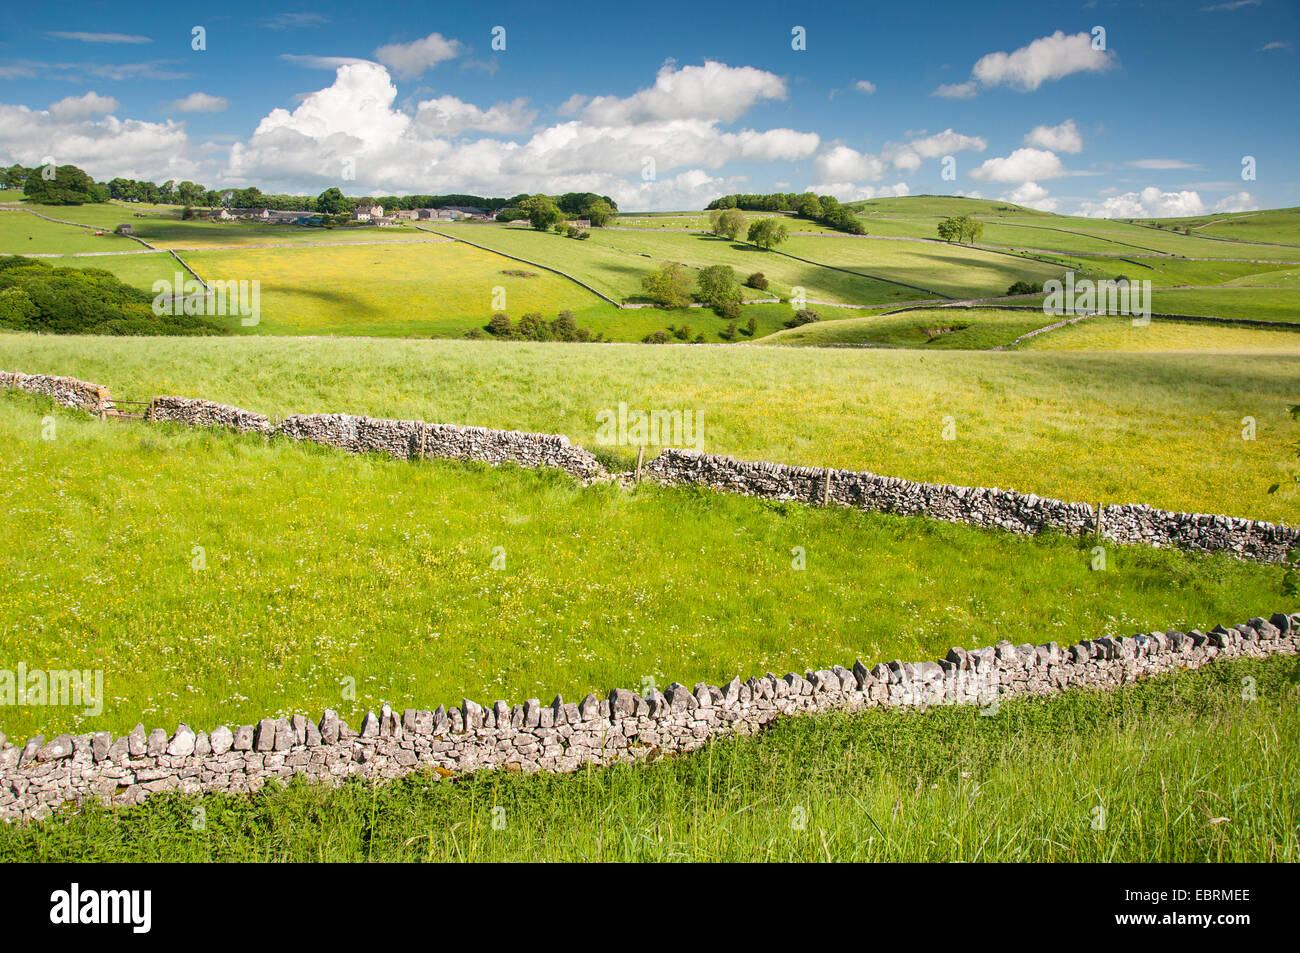 Limestone walls criss crossing an English summer landscape in the Peak District. Summer meadows and view across green fields. Stock Photo